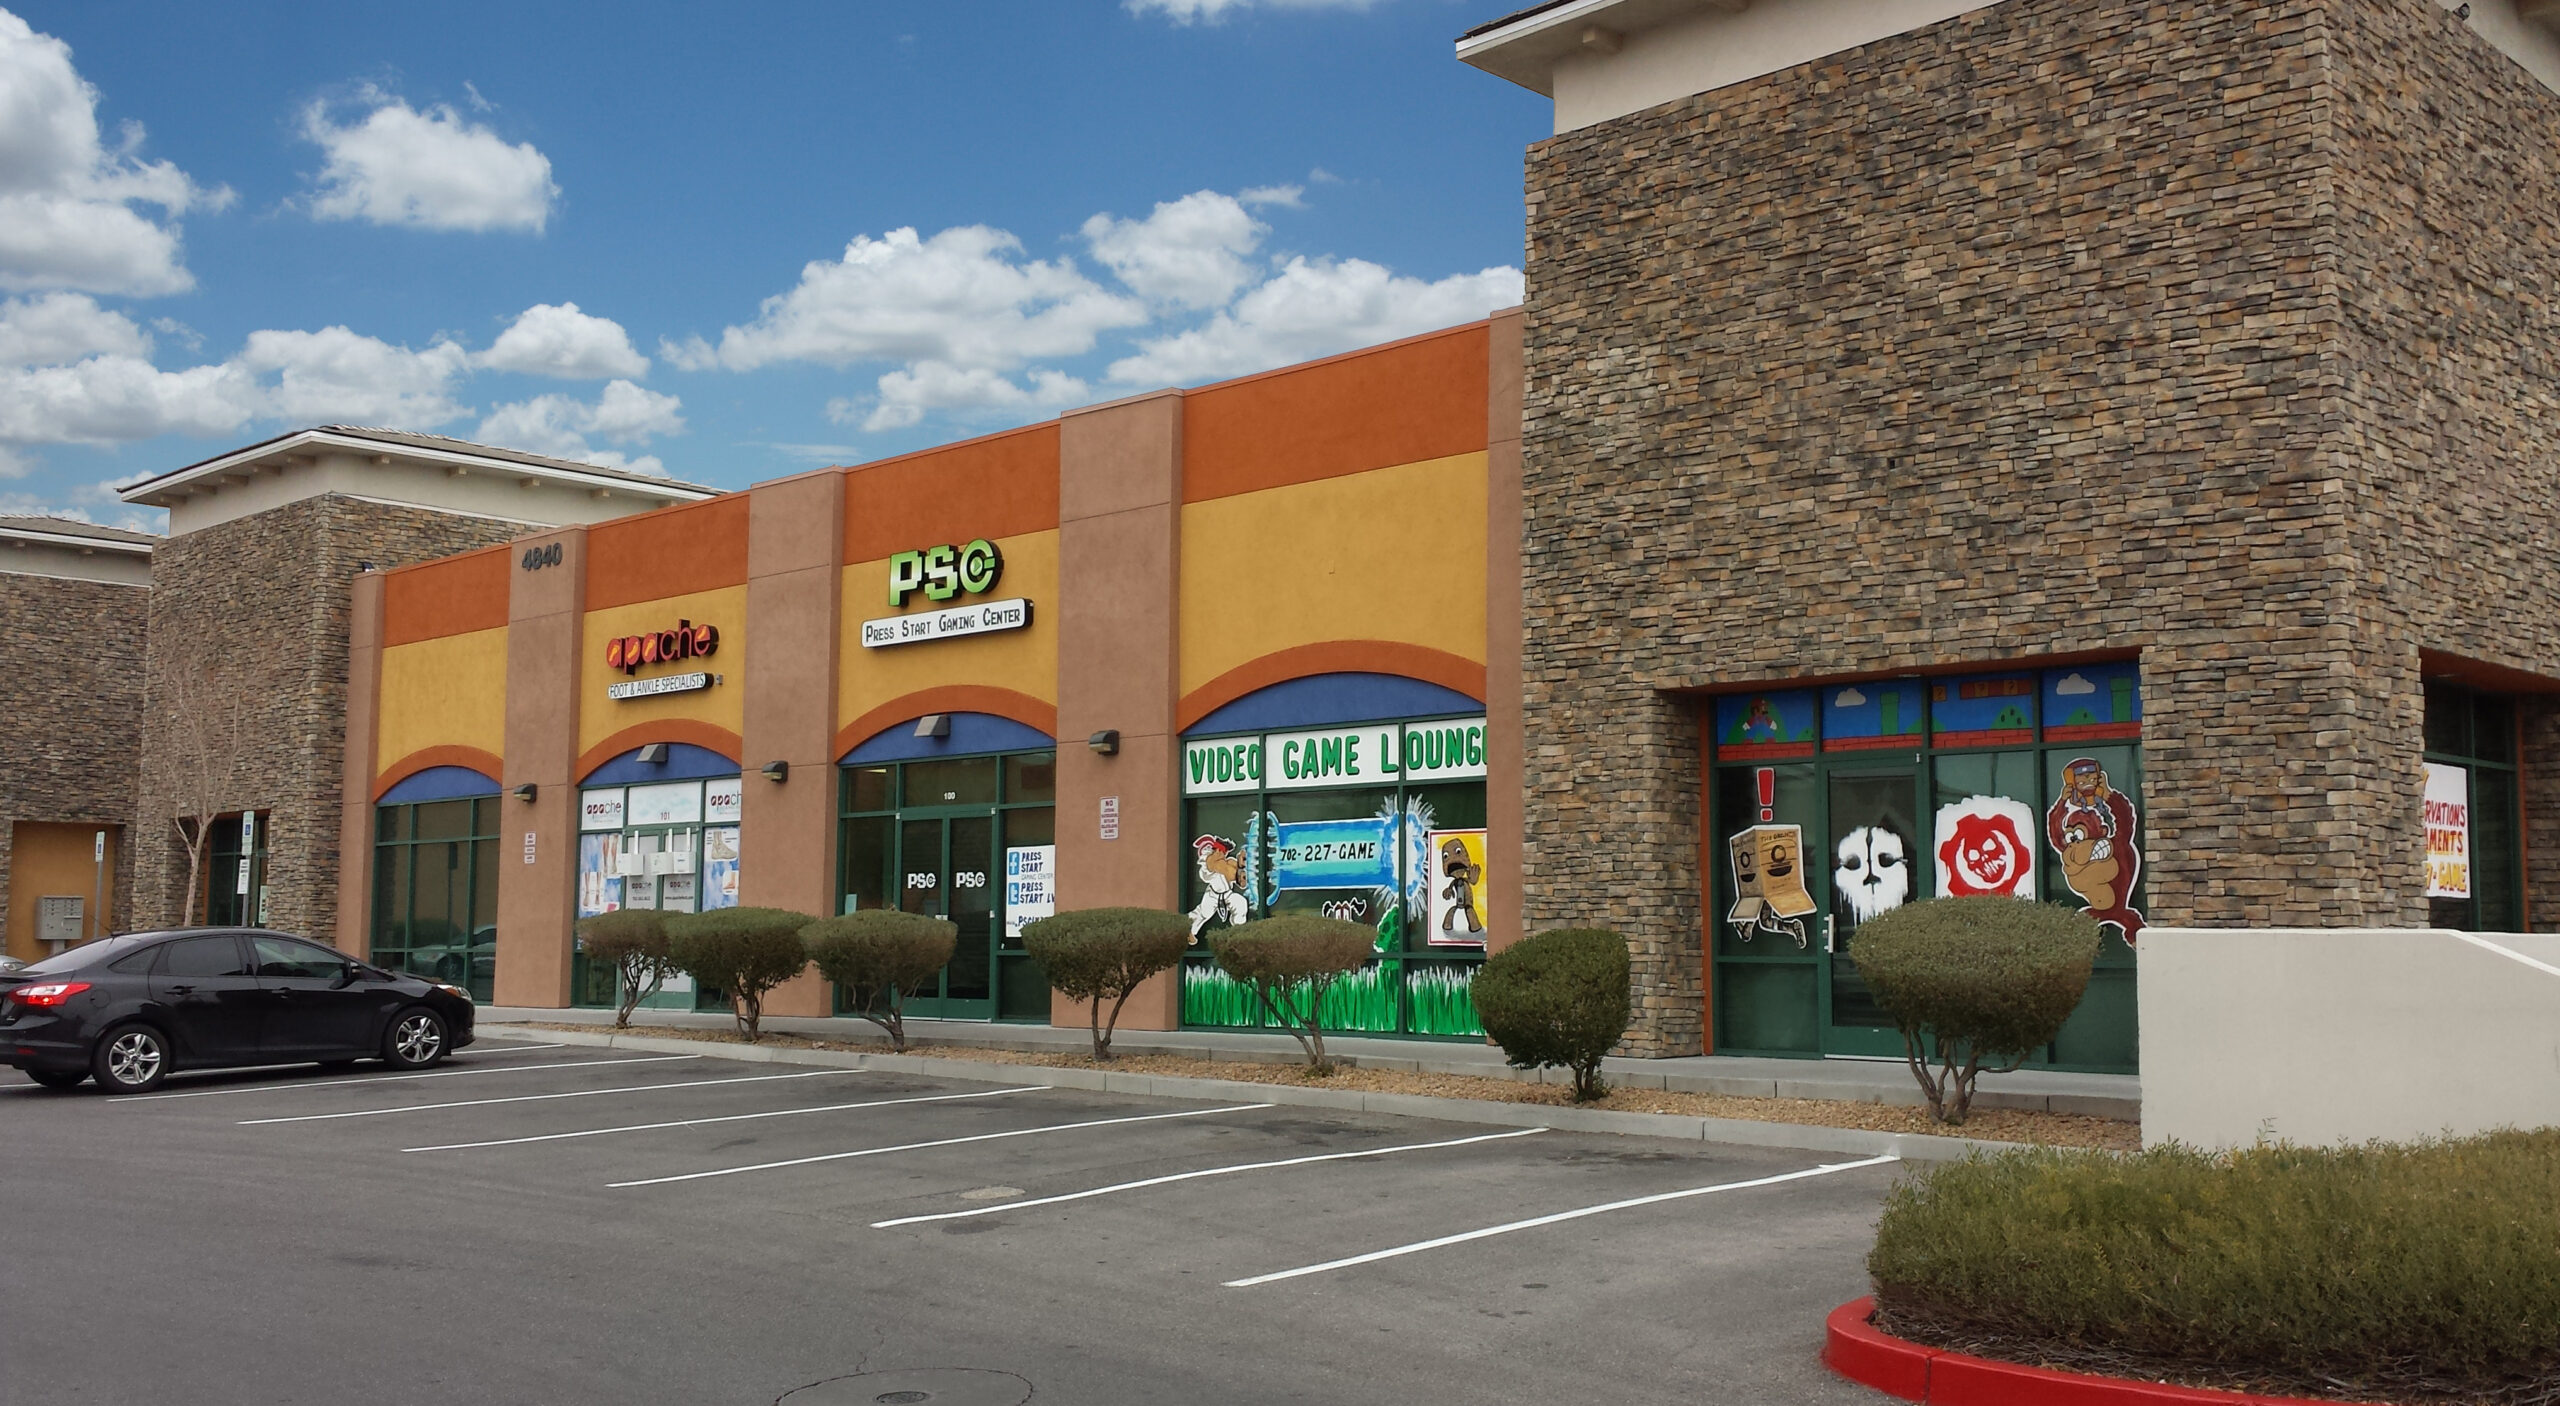 Colliers International announced the finalization of a sale to a retail property located at 4840 S. Fort Apache Road in Las Vegas.